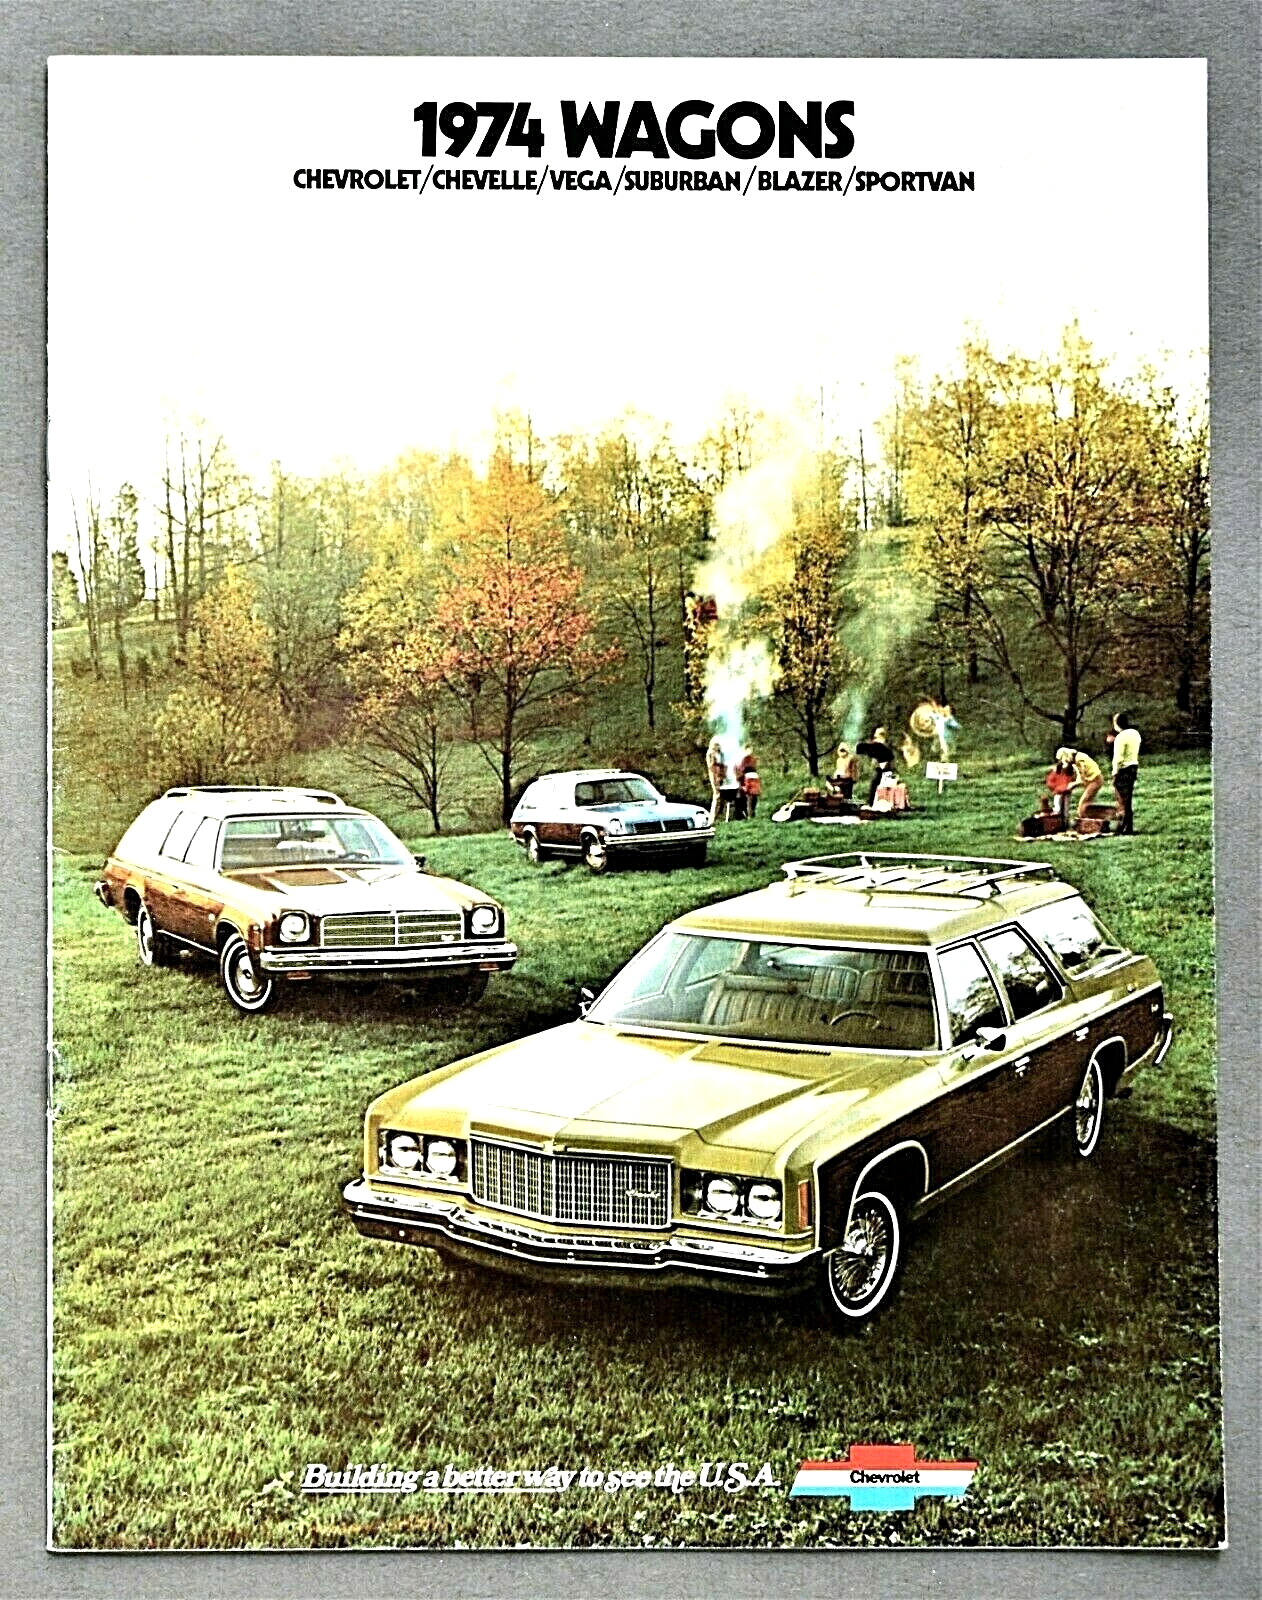 1974 CHEVROLET FULL LINE STATION WAGON SALES BROCHURE CATALOG ~ 20 PAGES